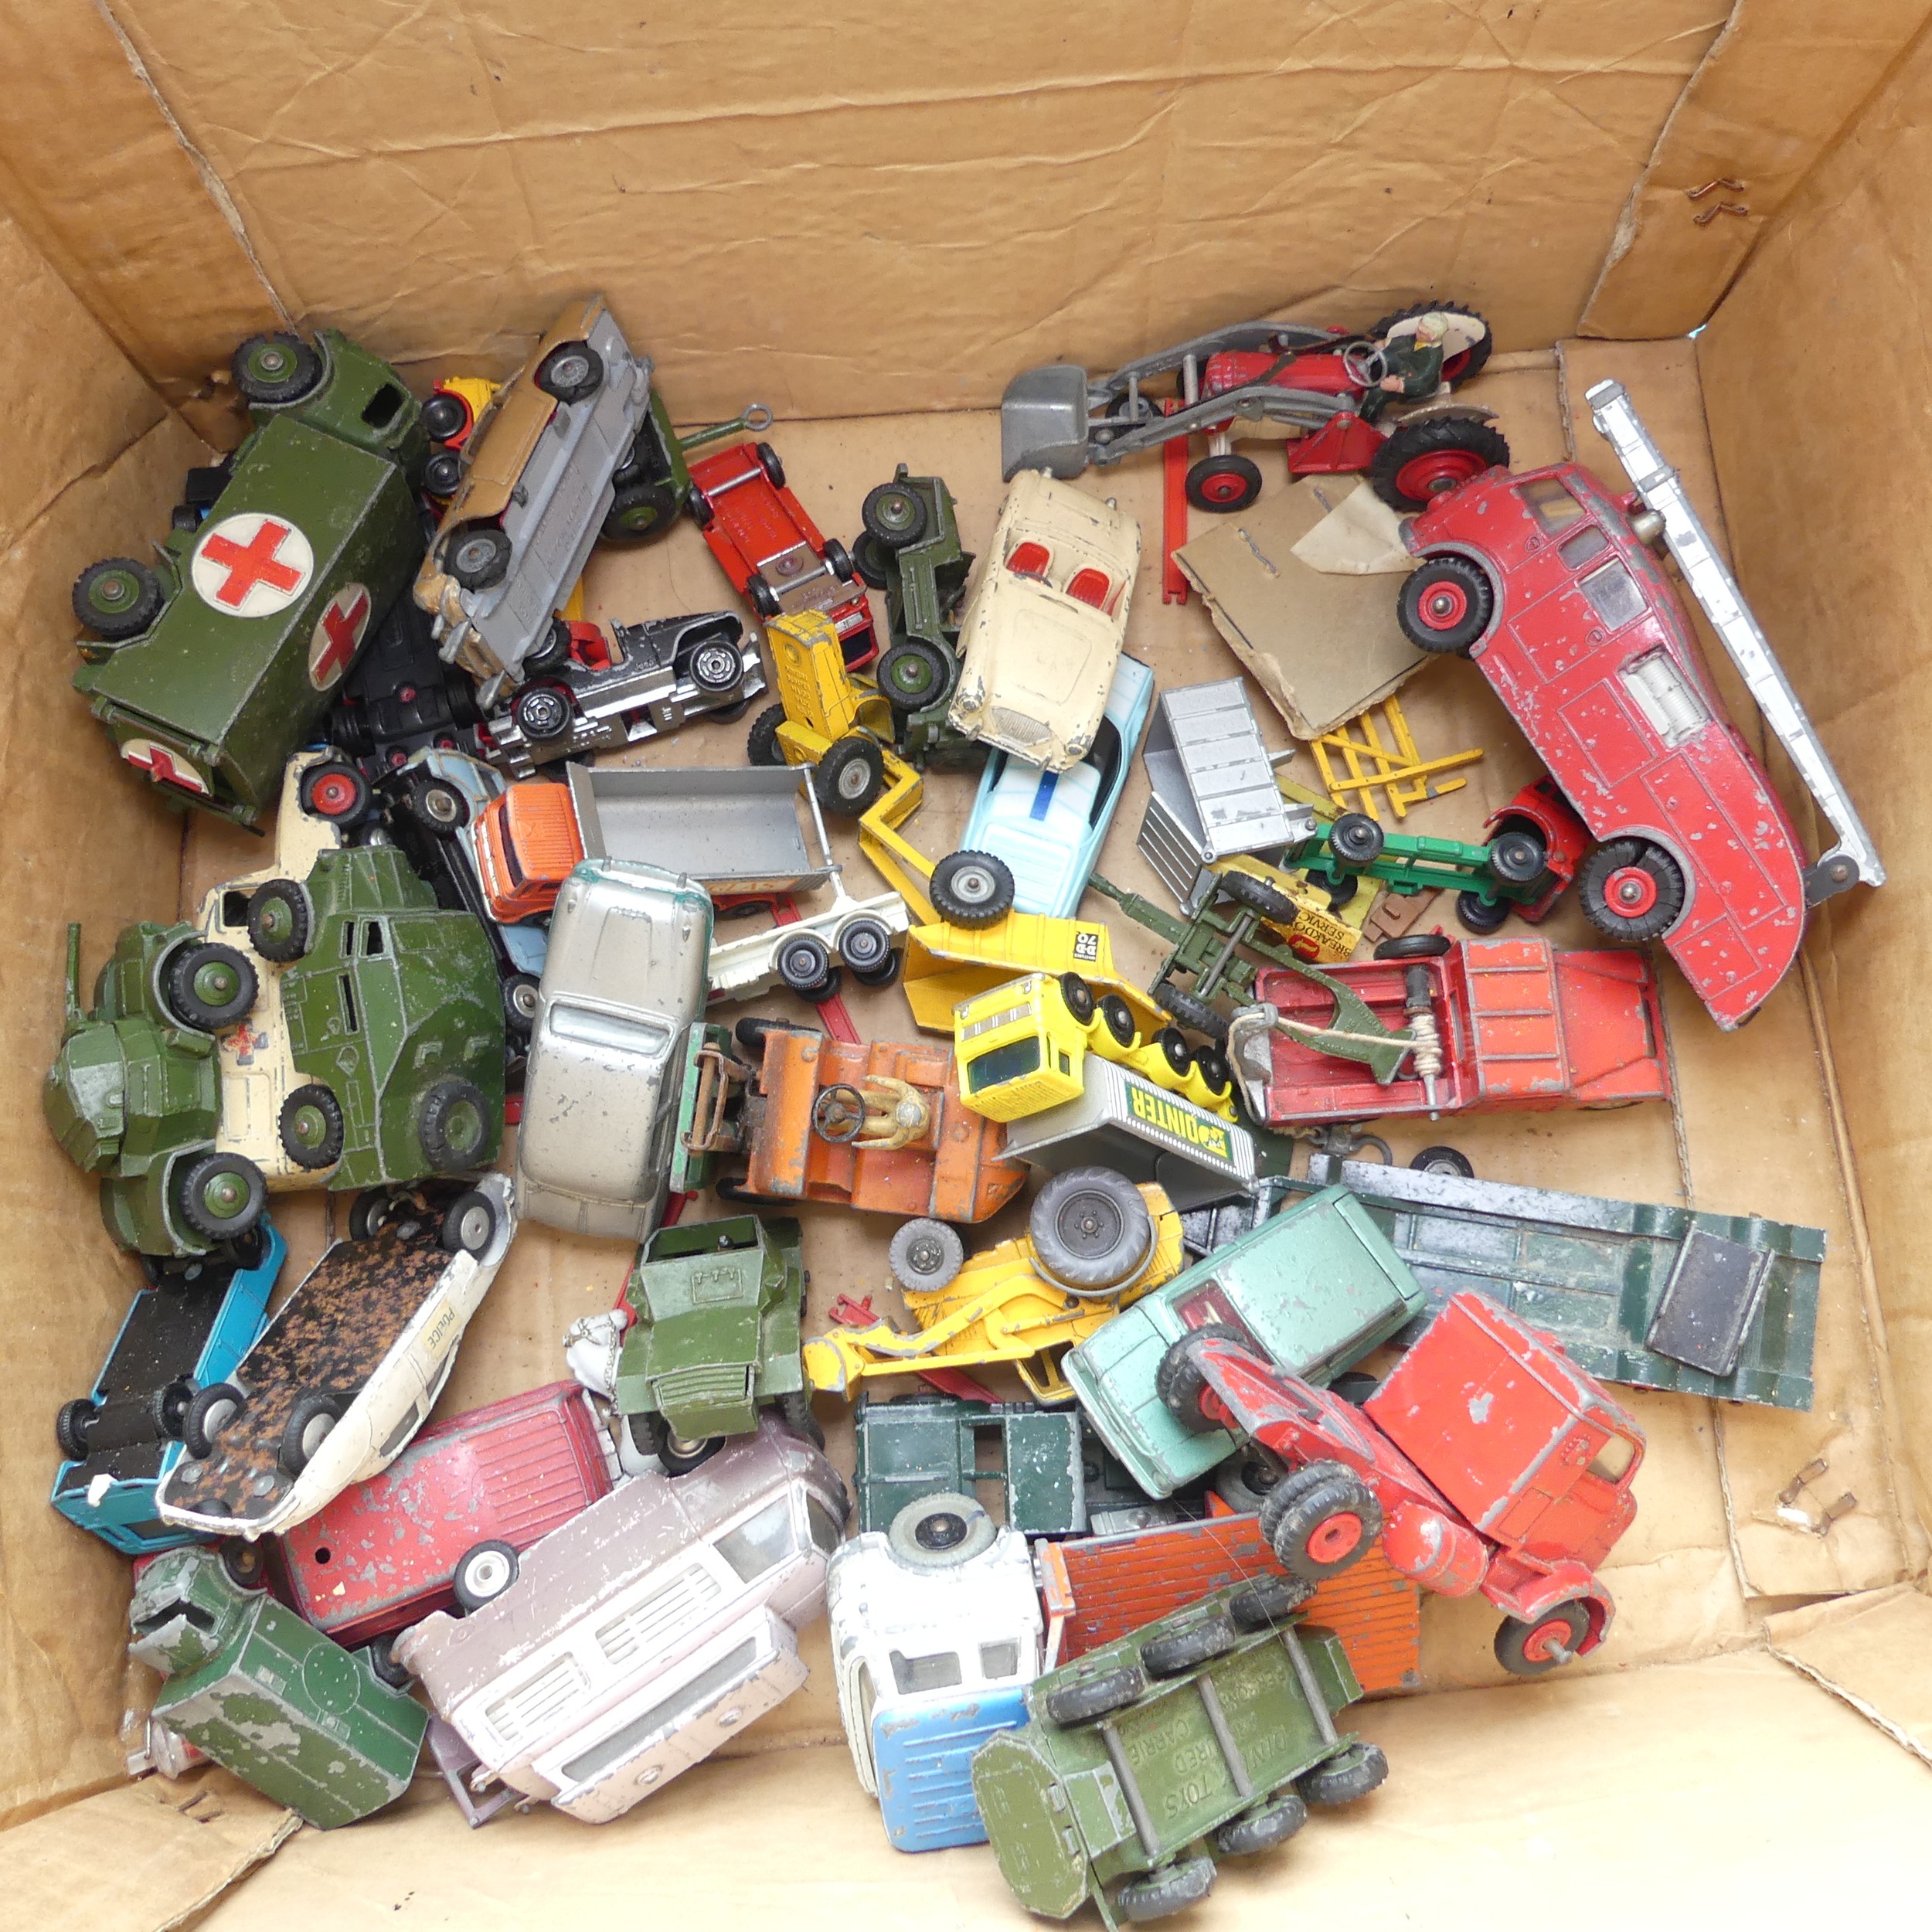 A collection of play-worn die-cast metal toy model cars, commercial and army vehicles, mostly - Image 2 of 3